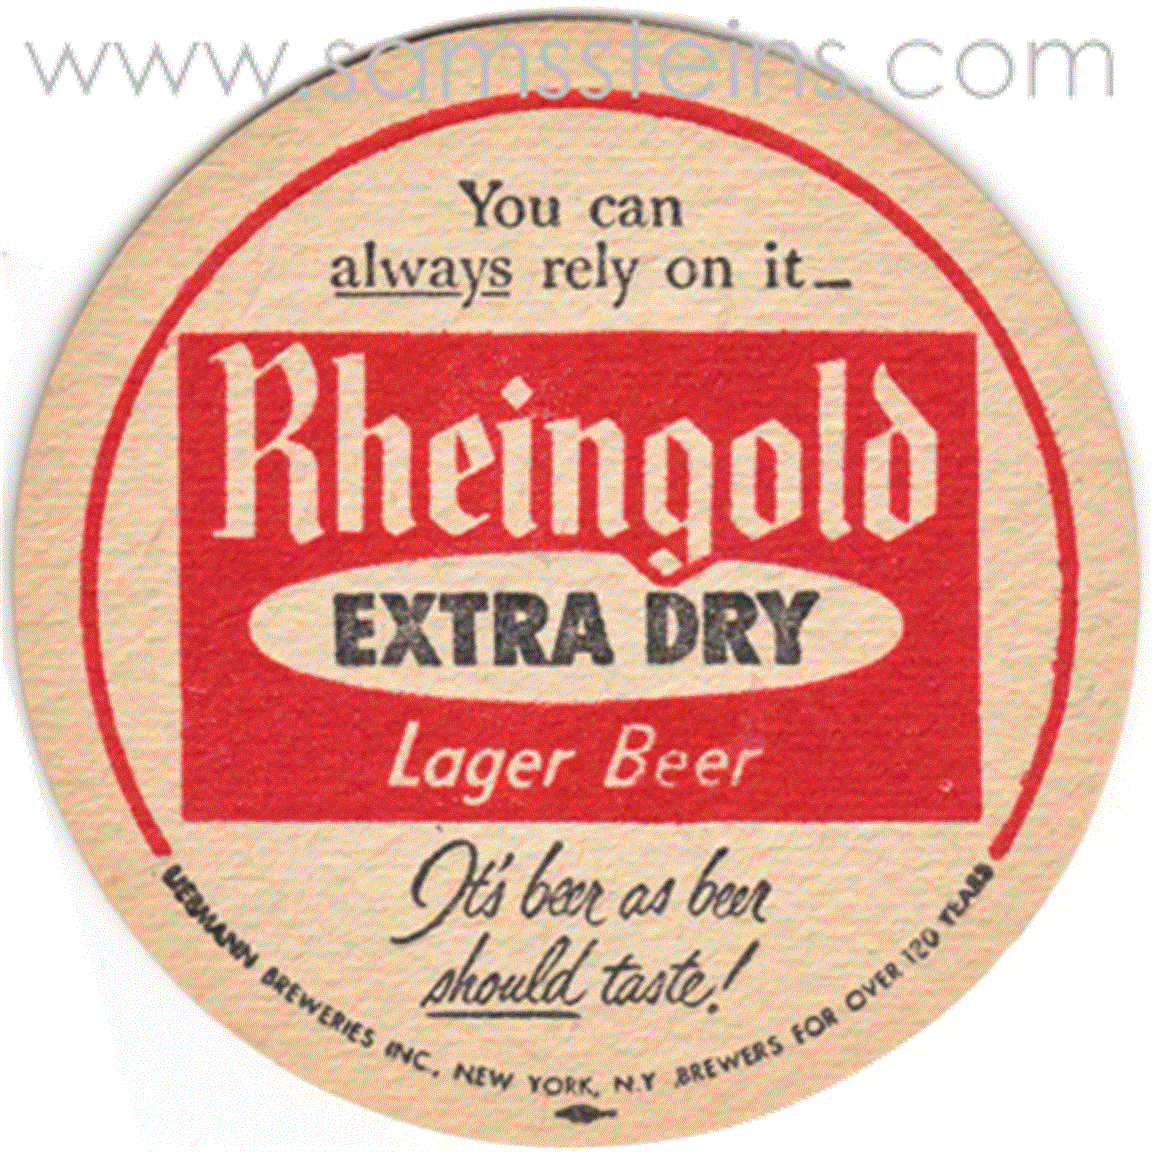 Rheingold Extra Dry Rely On It Beer Coaster